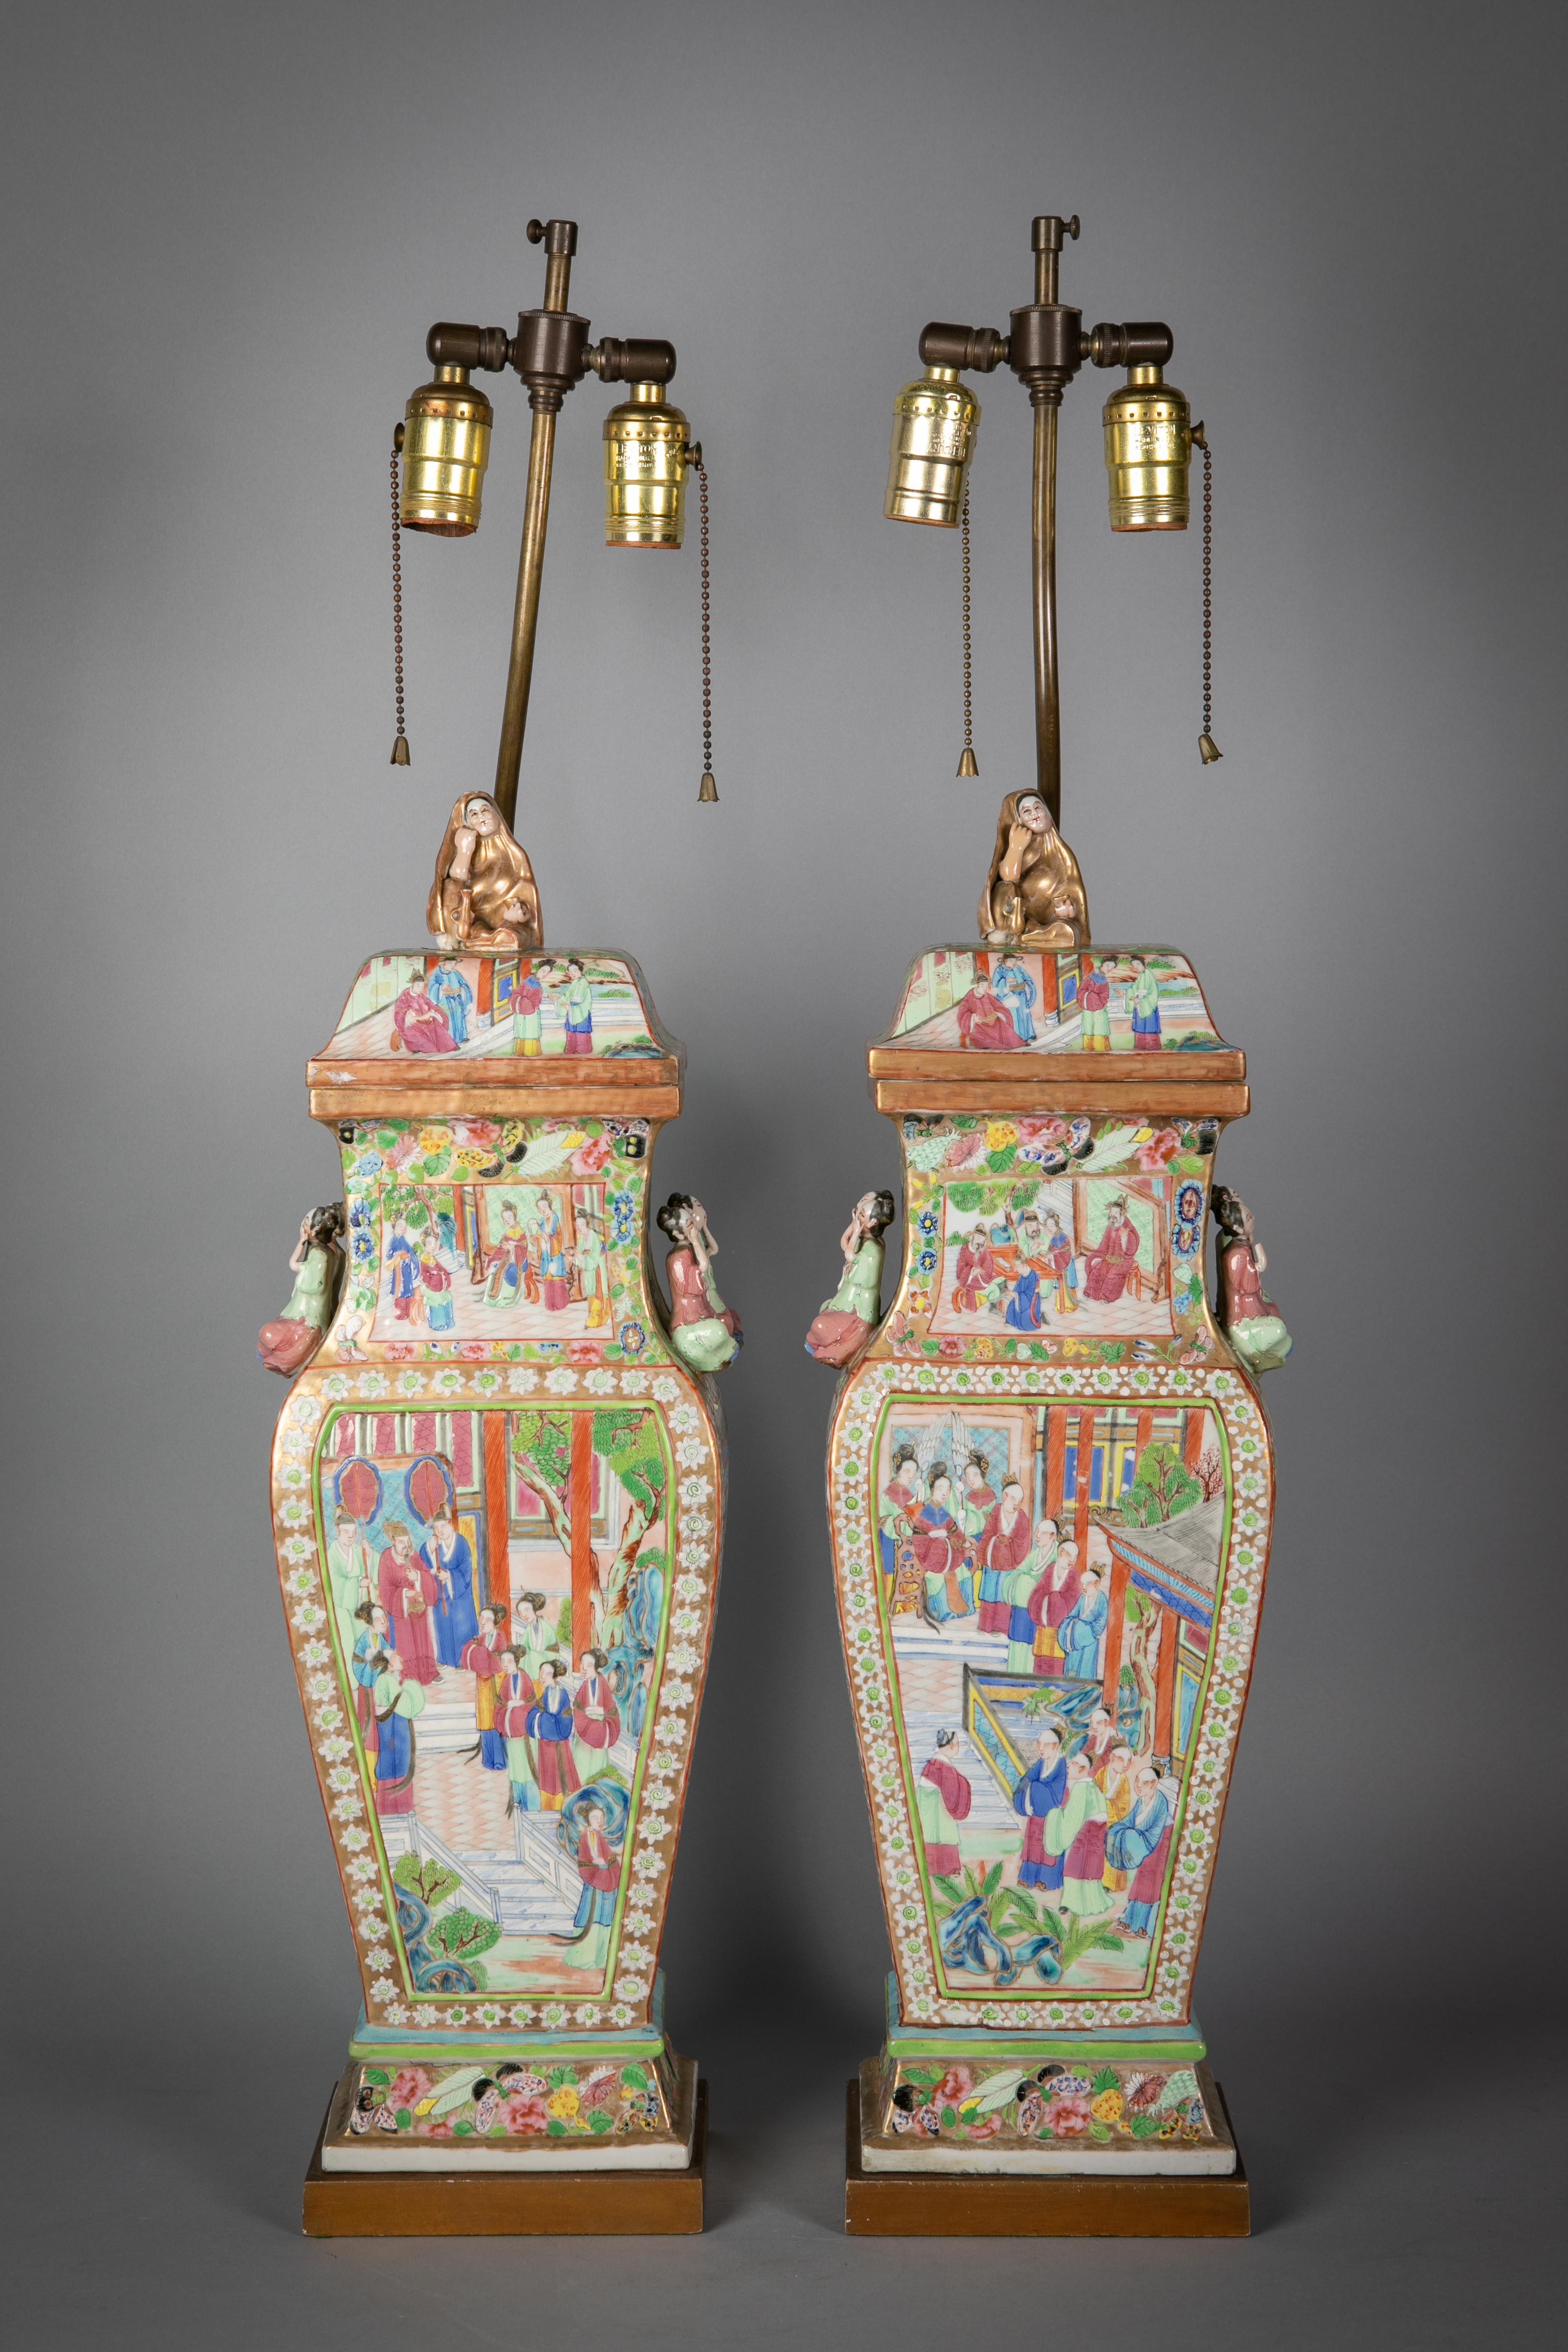 Pair of fine Chinese Porcelain rose mandarin covered vases as lamps, circa 1840. Lamp shades are not included.